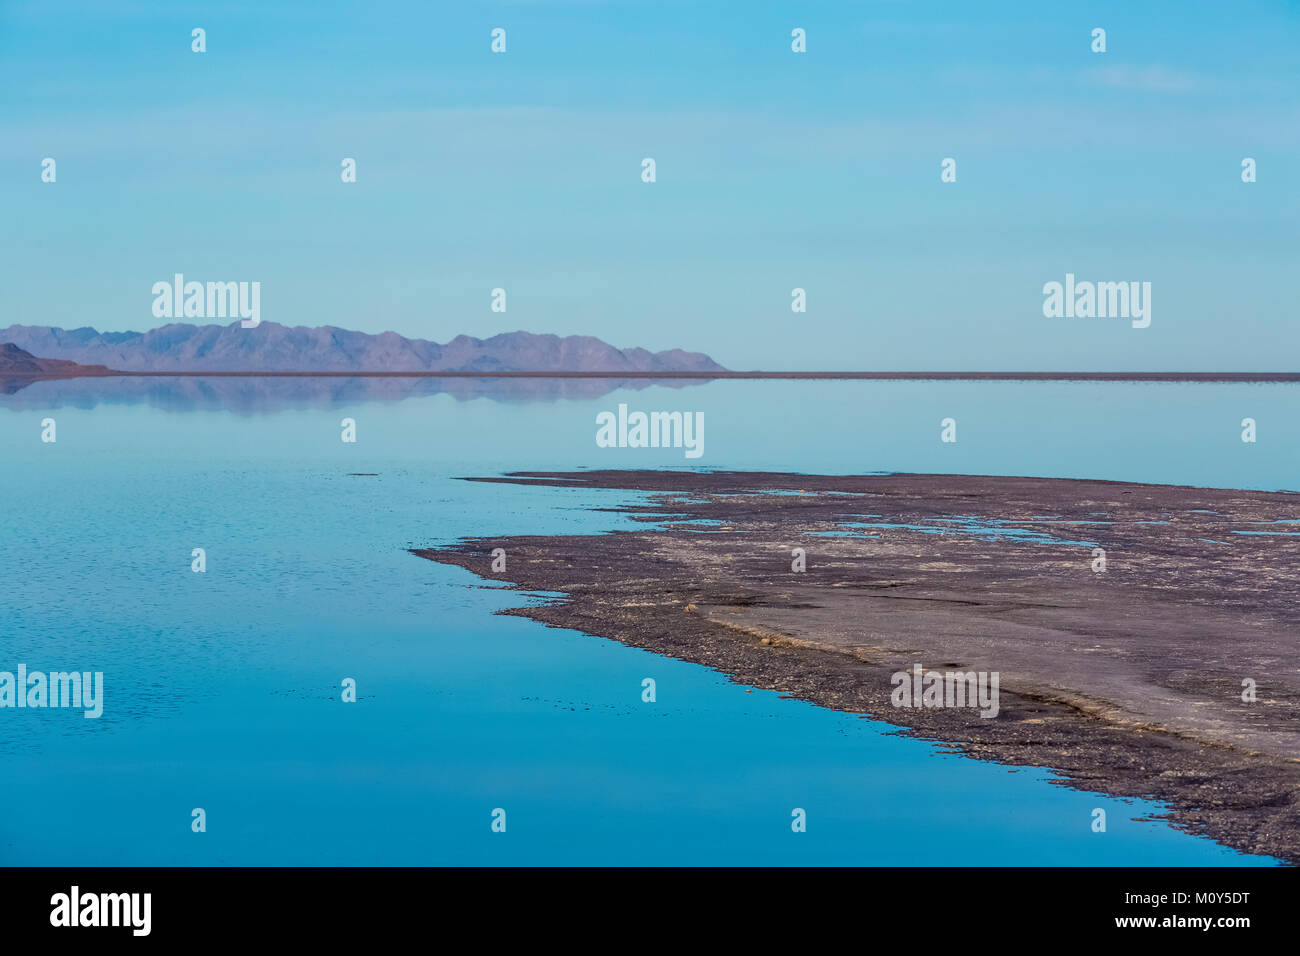 A spit of land with vast shallow flooded salt flats at the Bonneville Salt Flats, which is BLM land west of the Great Salt Lake, Utah, USA Stock Photo